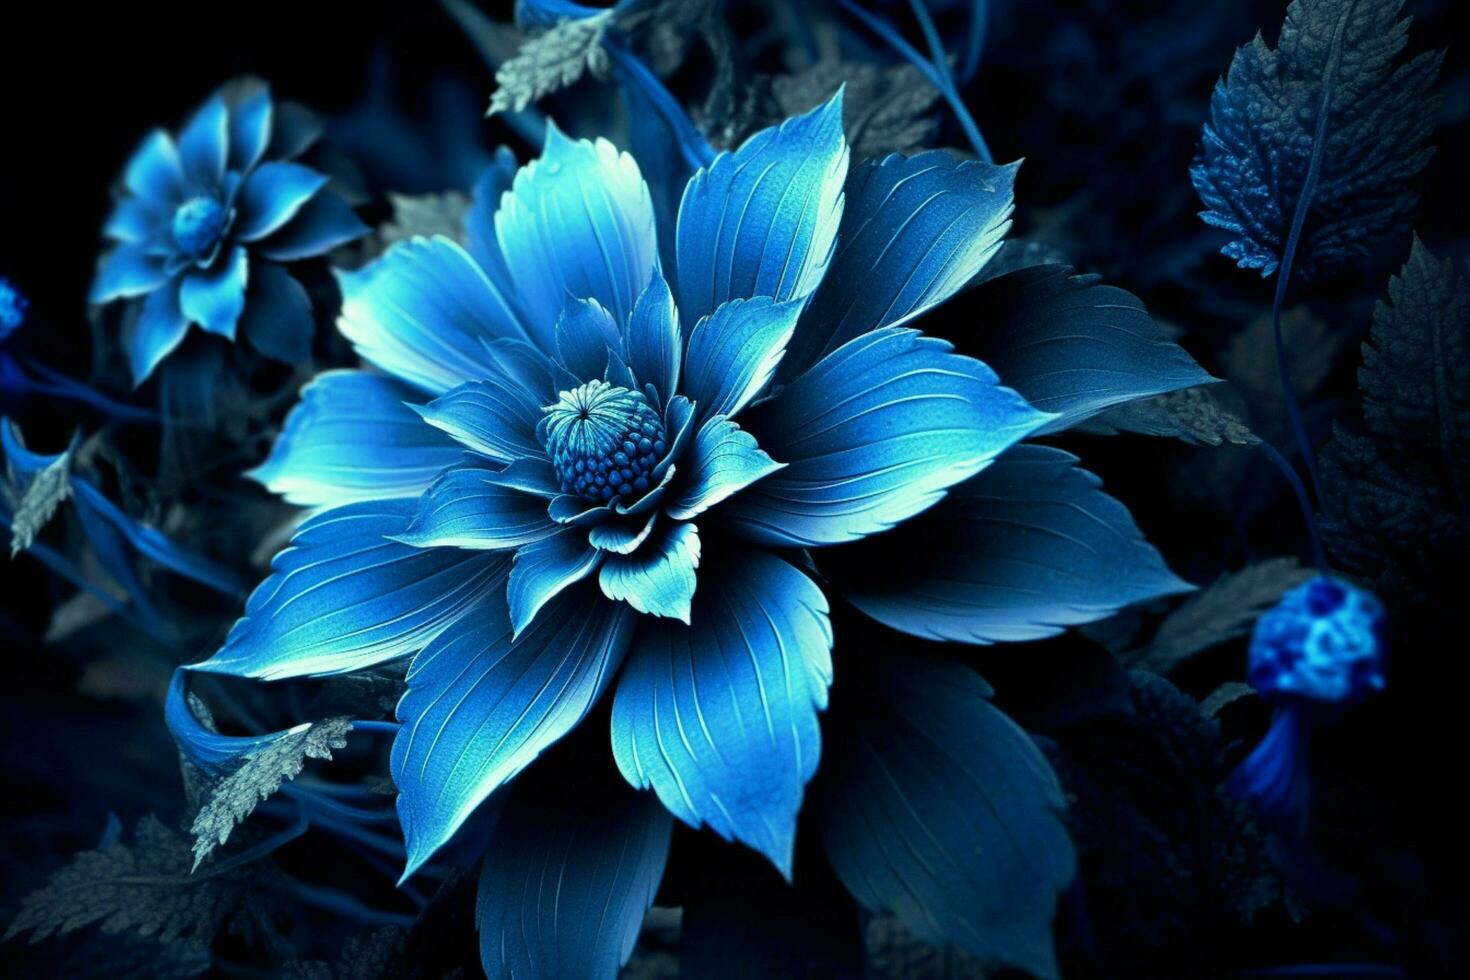 blue wallpapers that will make your desktop look bl photo